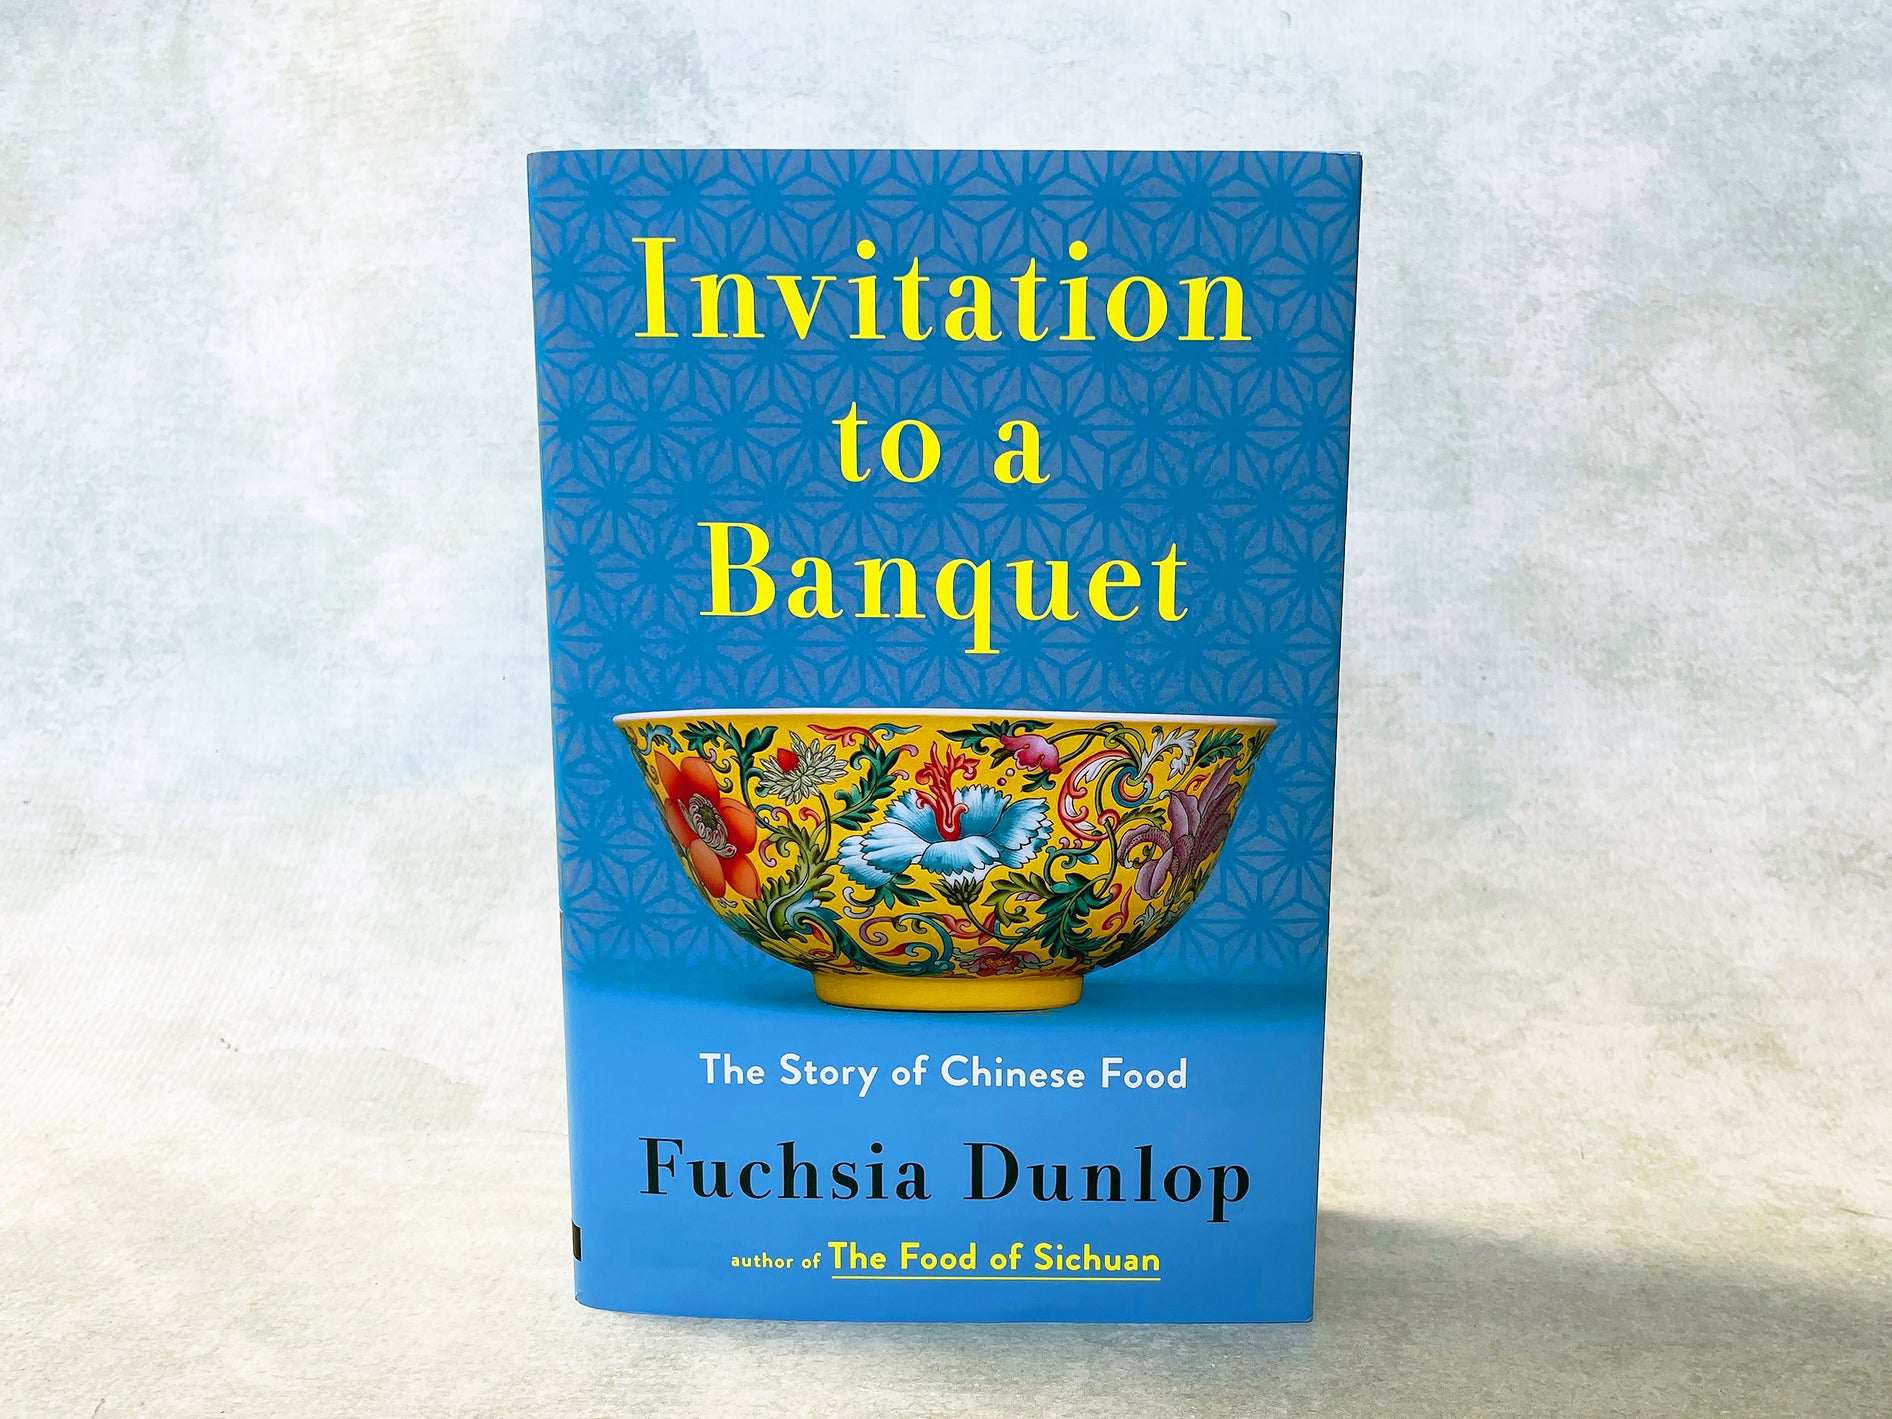 Invitation to a Banquet: The Story of Chinese Food (By Fuchsia Dunlop) *Bookplate Signed by the Author*